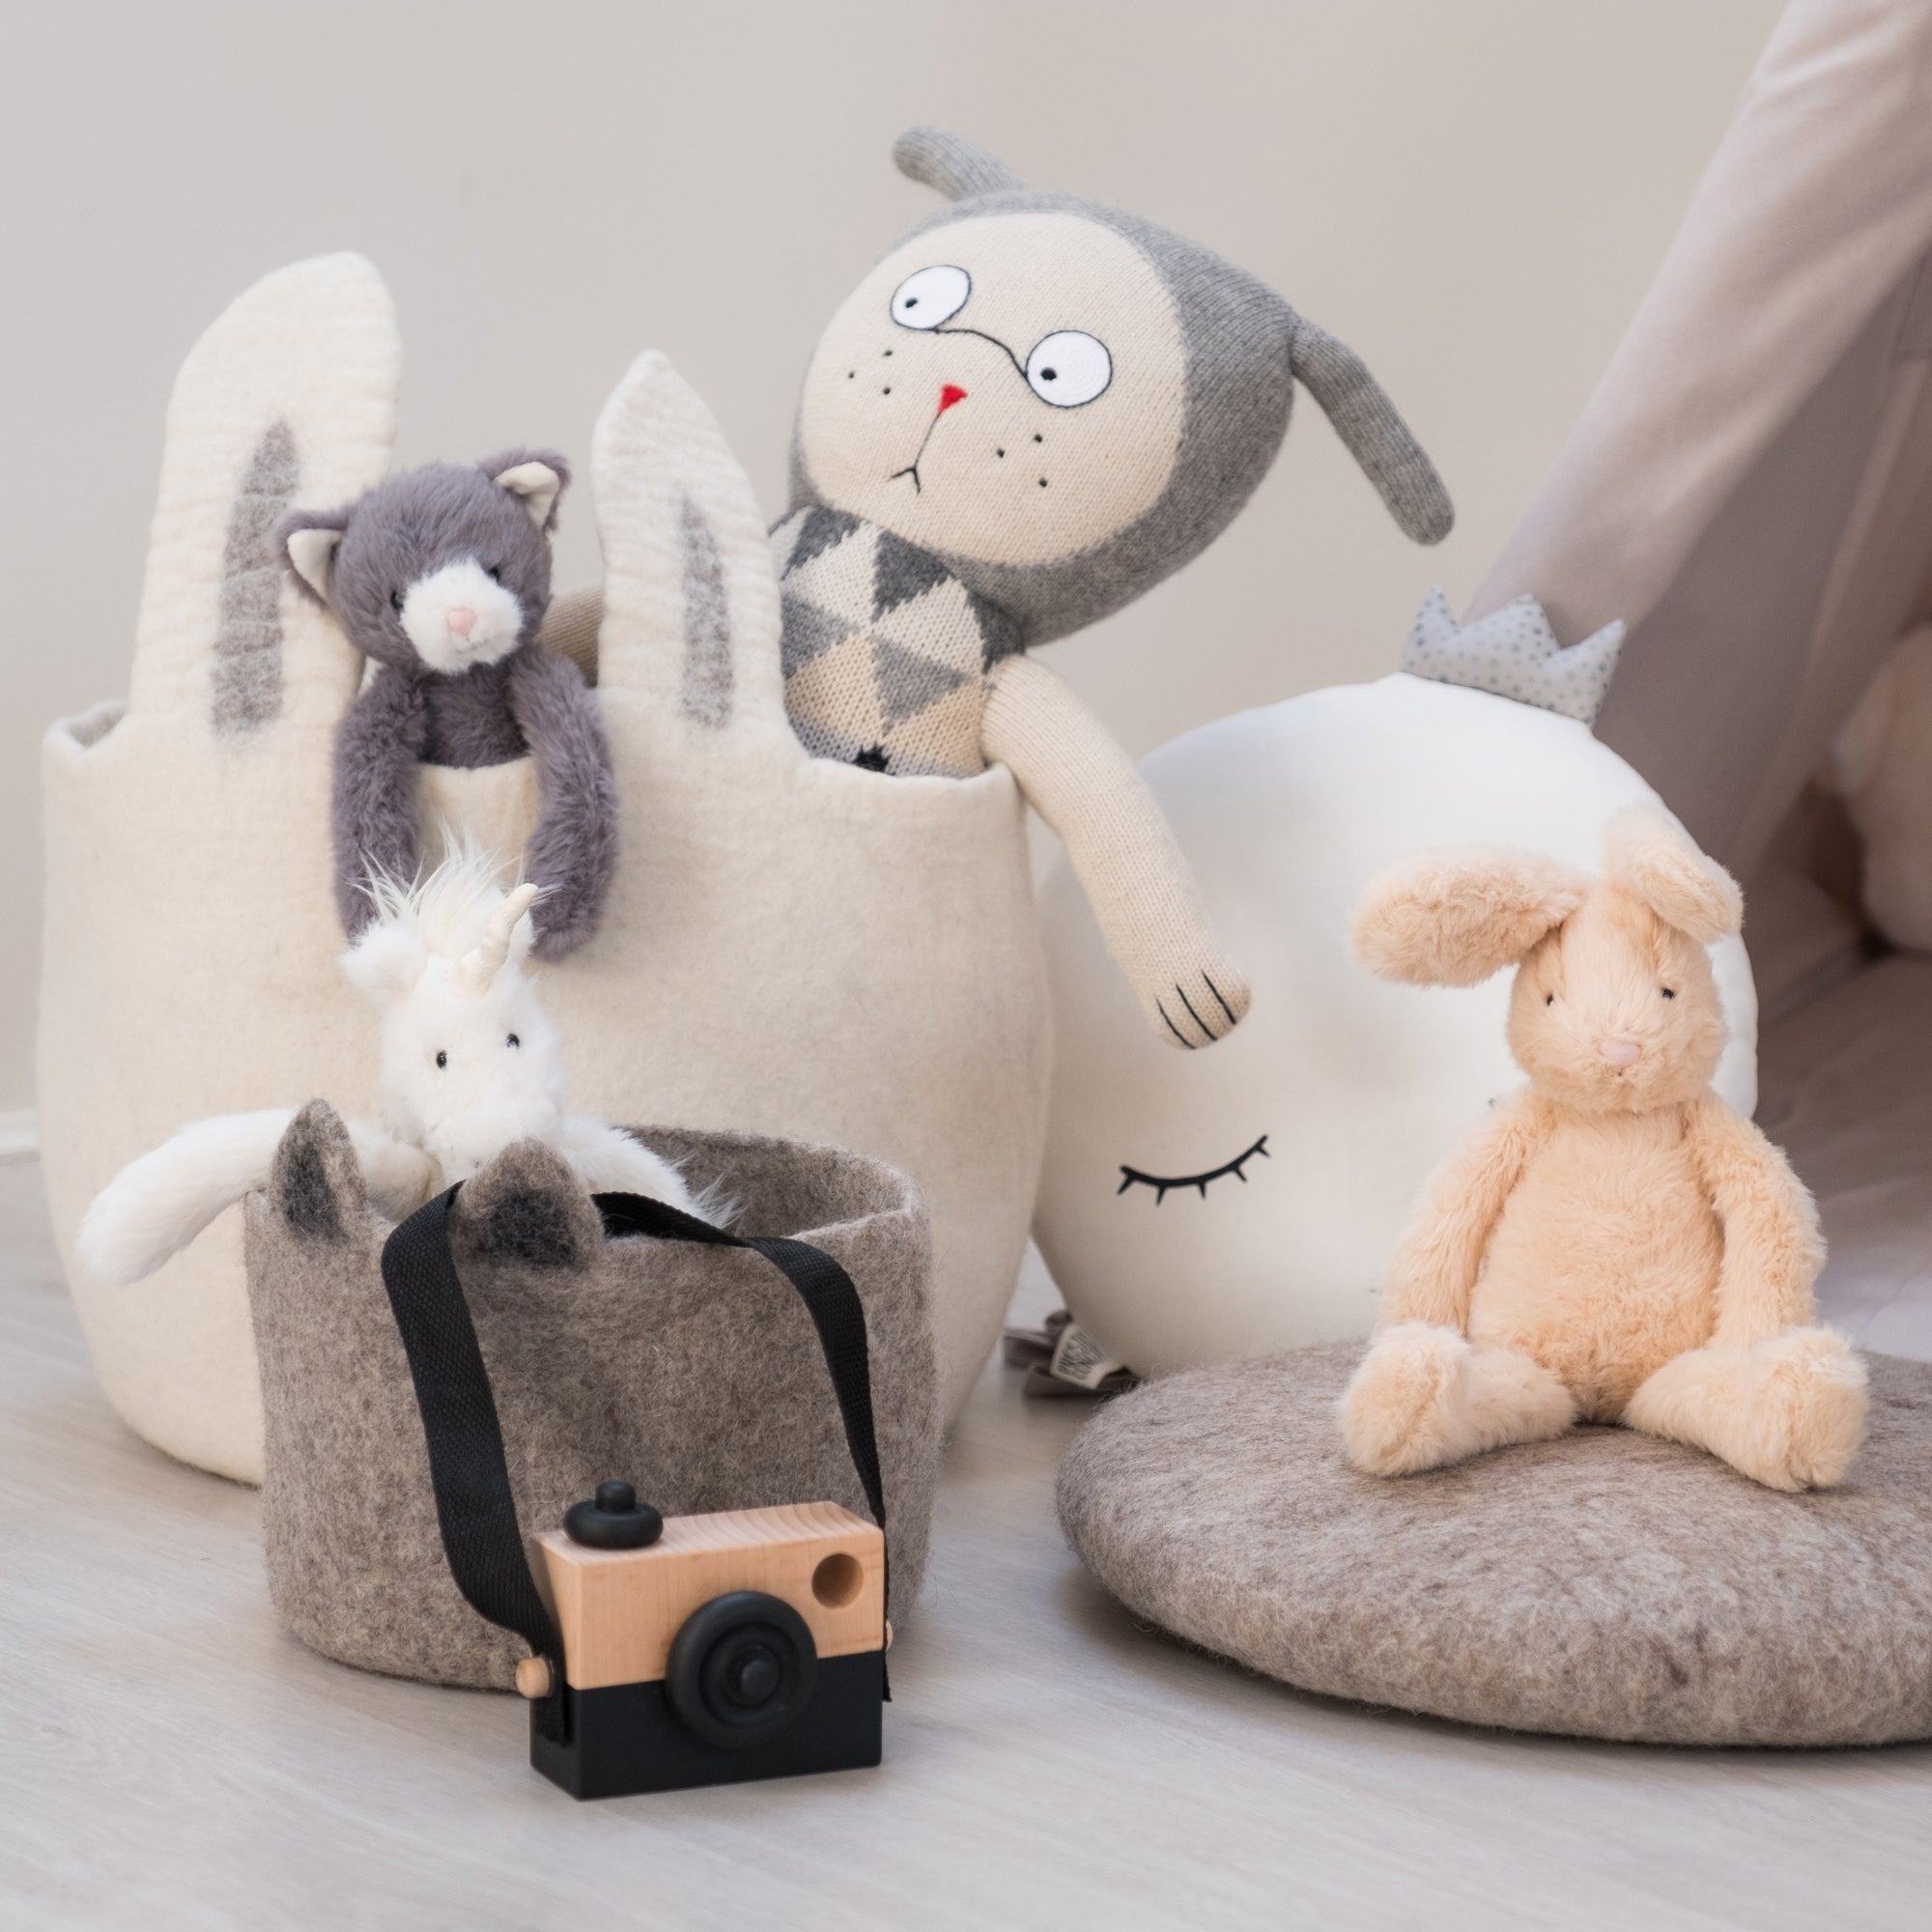 Felt Bunny and Cat Storage Baskets with toys and accessories, available at Bobby Rabbit.